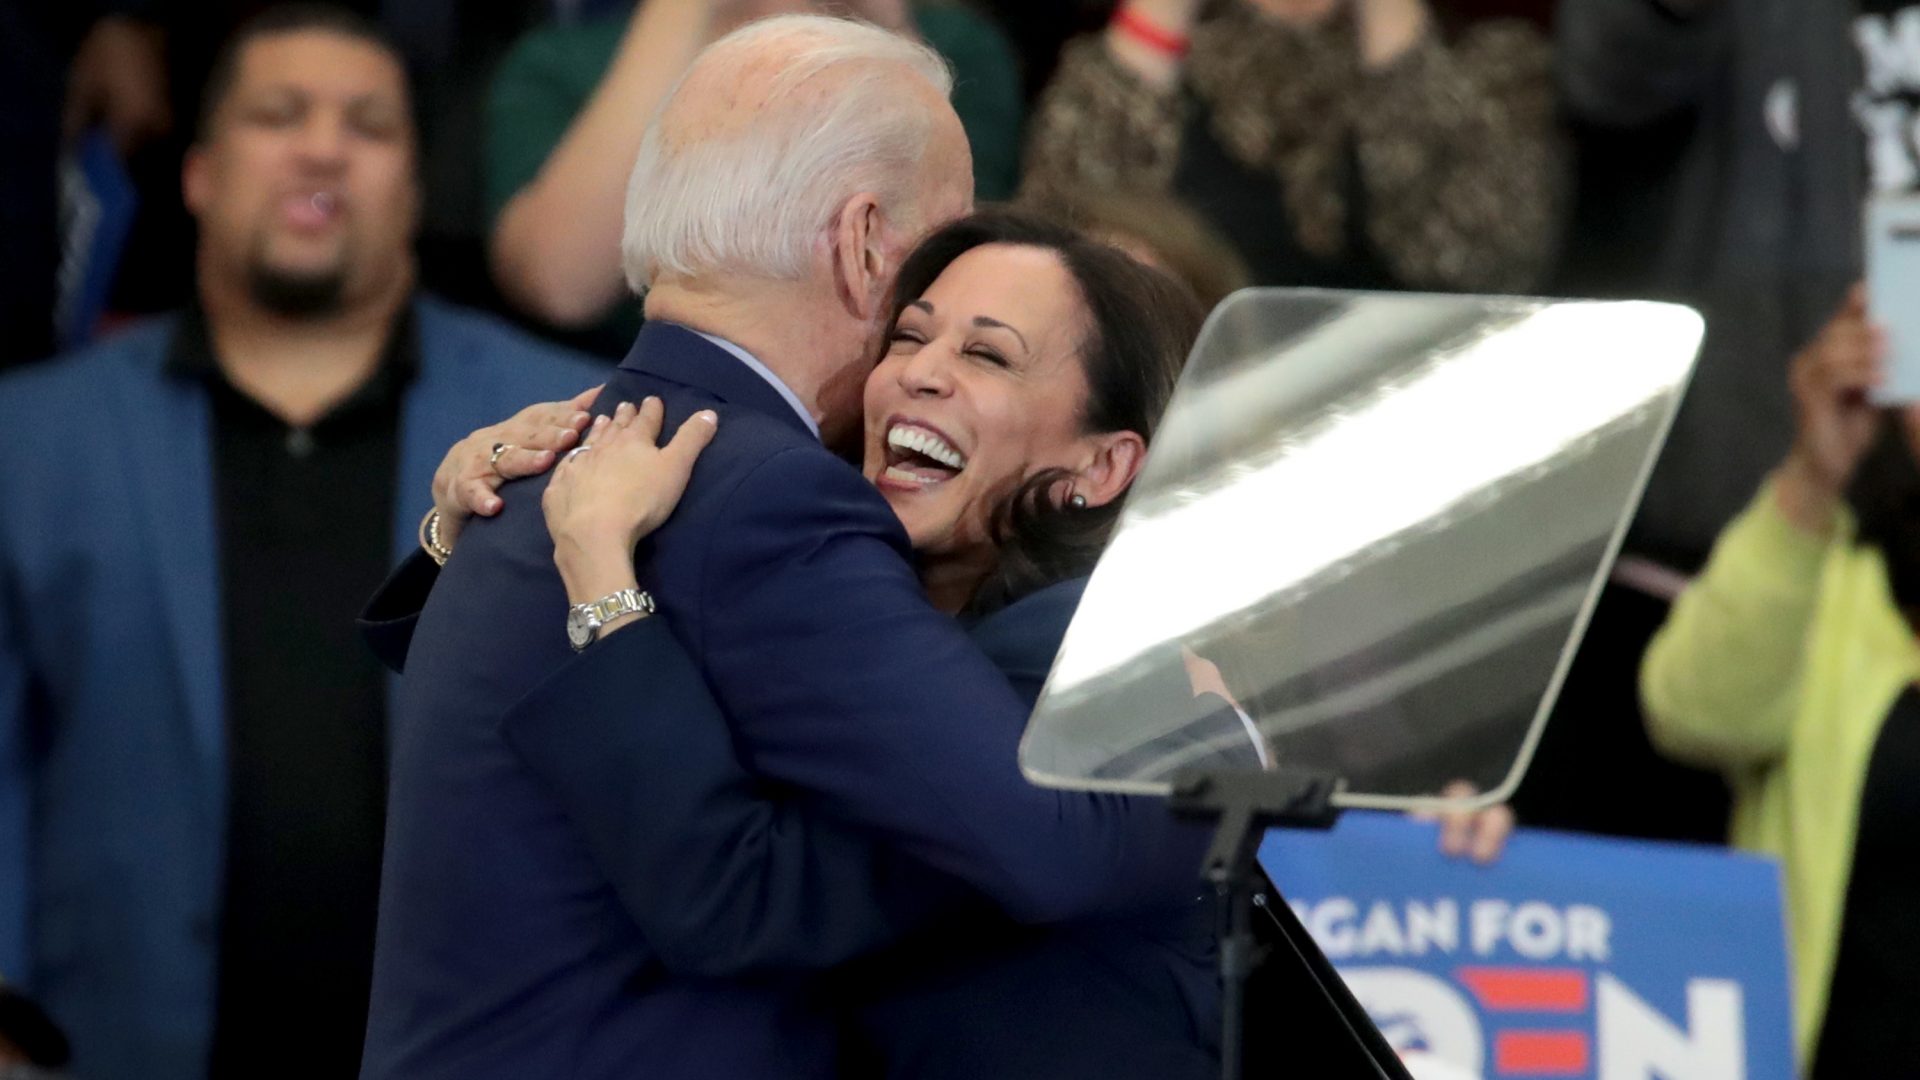 Biden and Harris hug after she endorsed and introduced him at a March 9 campaign rally in Detroit.